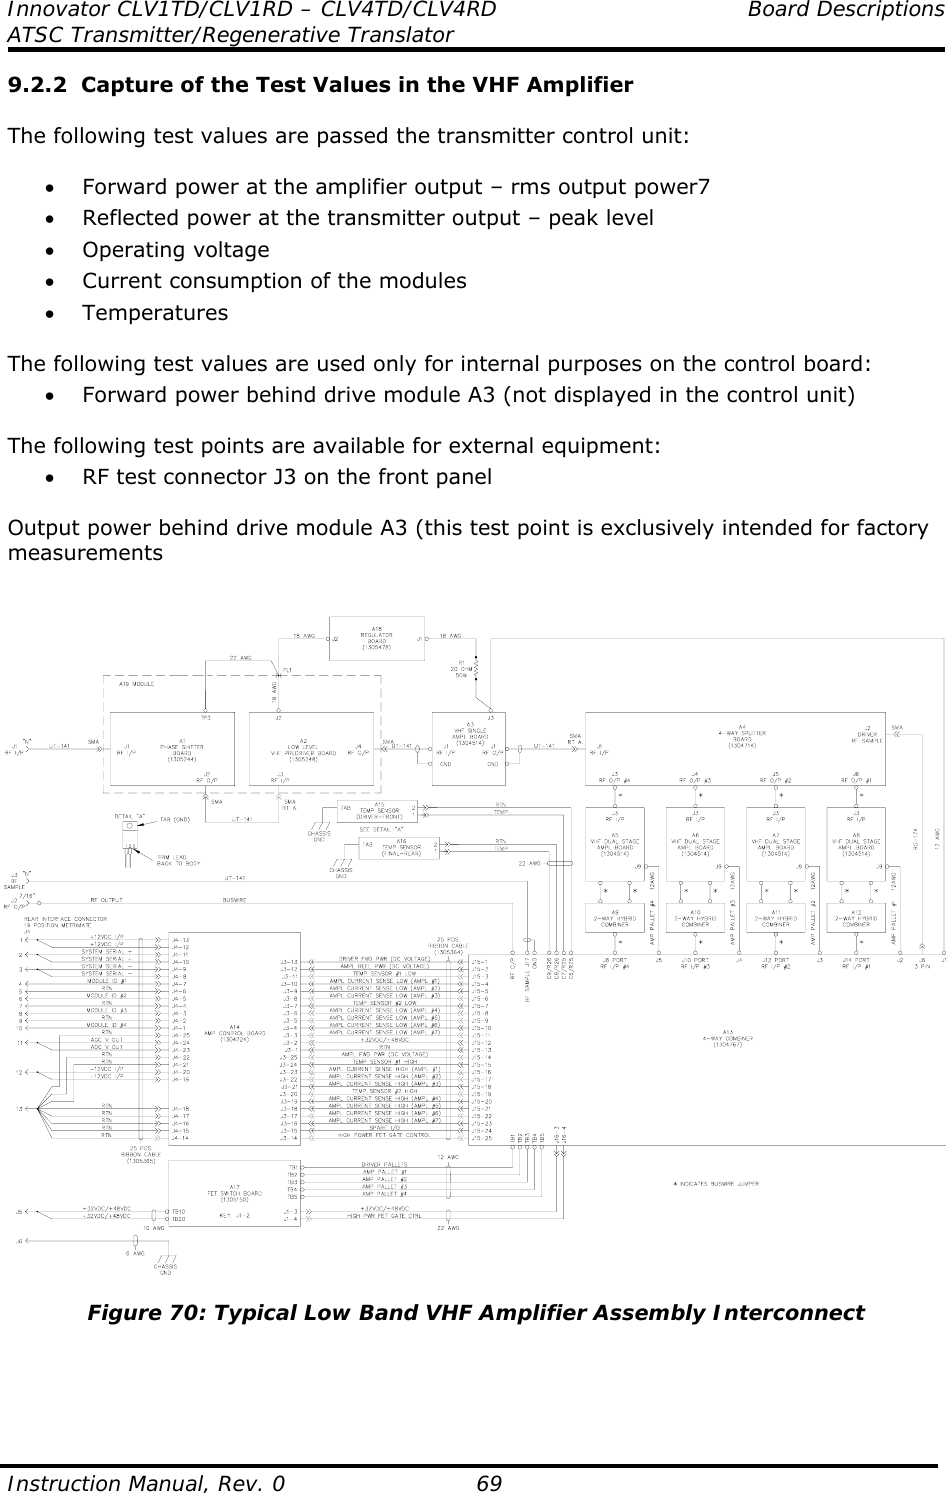 Innovator CLV1TD/CLV1RD – CLV4TD/CLV4RD  Board Descriptions ATSC Transmitter/Regenerative Translator  Instruction Manual, Rev. 0    69 9.2.2  Capture of the Test Values in the VHF Amplifier  The following test values are passed the transmitter control unit:  • Forward power at the amplifier output – rms output power7 • Reflected power at the transmitter output – peak level • Operating voltage • Current consumption of the modules • Temperatures  The following test values are used only for internal purposes on the control board: • Forward power behind drive module A3 (not displayed in the control unit)  The following test points are available for external equipment: • RF test connector J3 on the front panel  Output power behind drive module A3 (this test point is exclusively intended for factory measurements   Figure 70: Typical Low Band VHF Amplifier Assembly Interconnect     